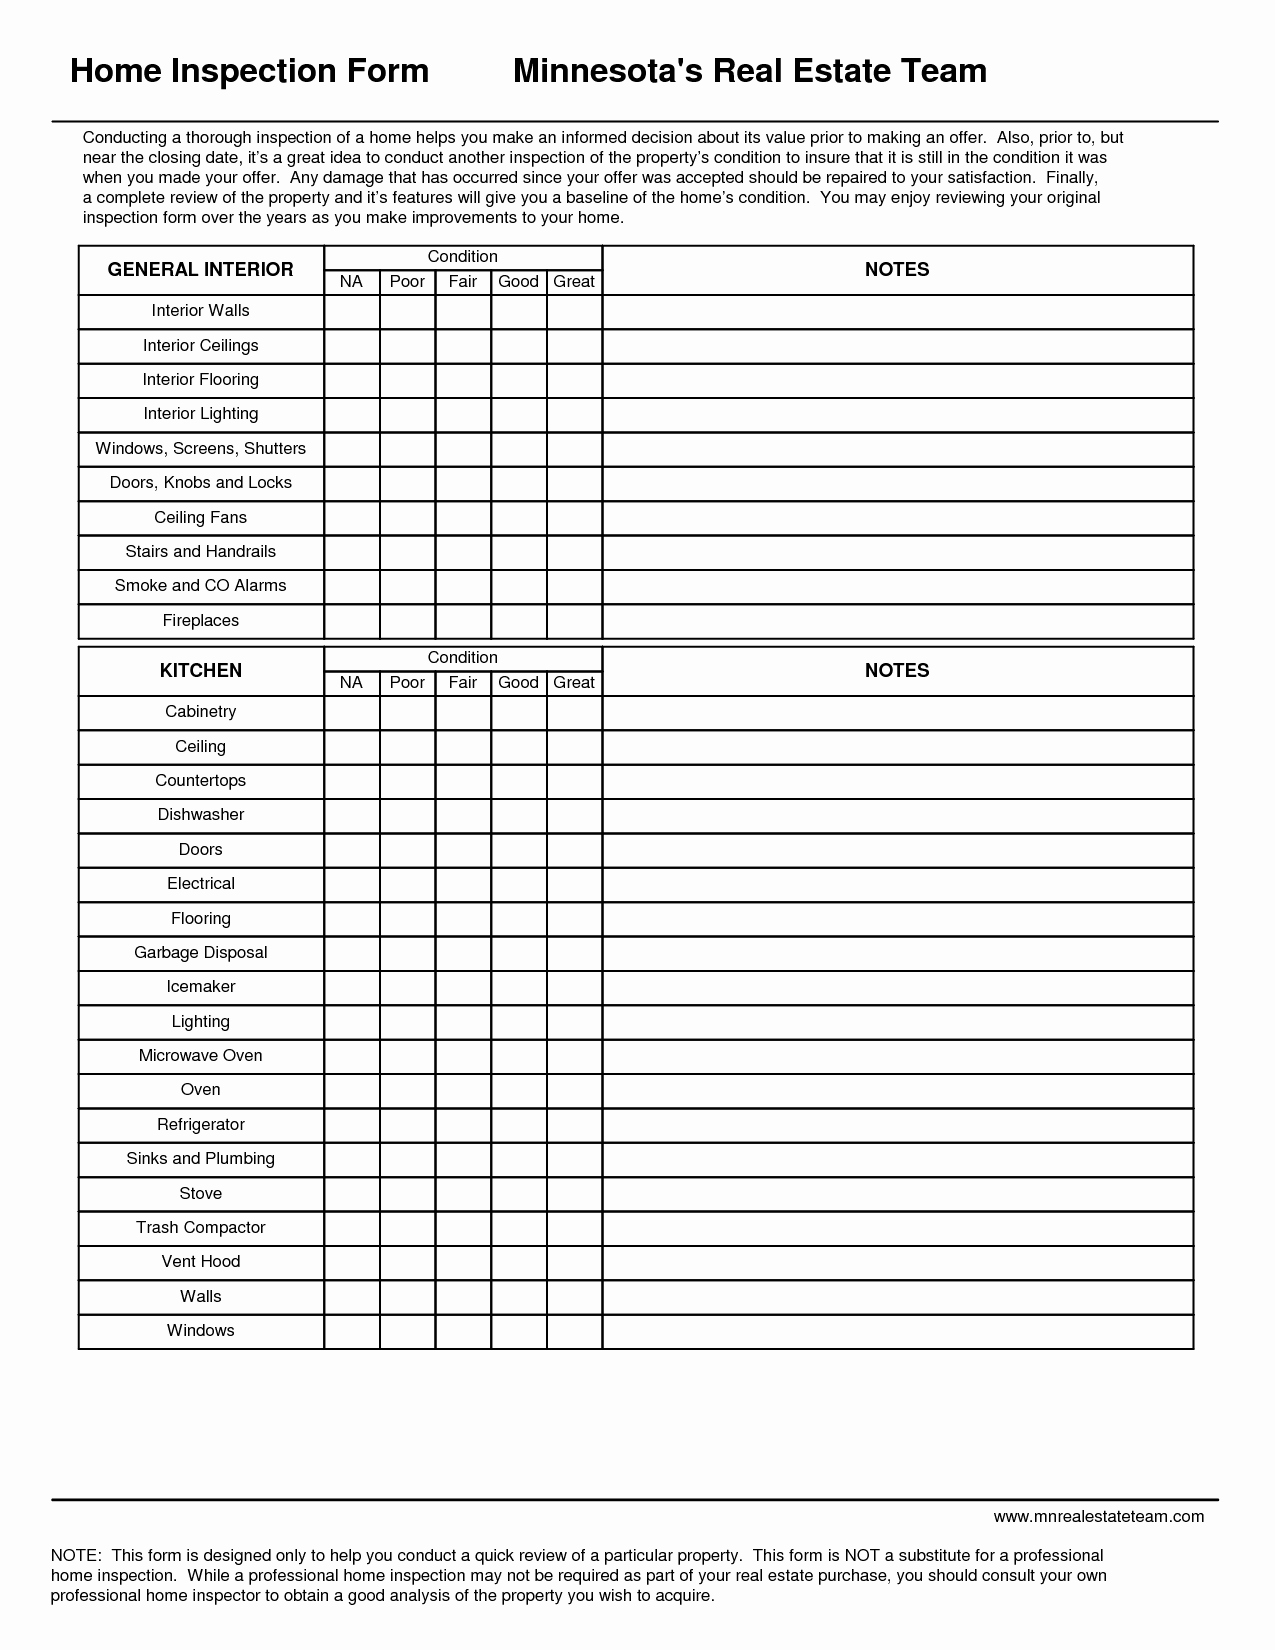 Home Inspection Checklist Template Fresh 28 Of Home Inspection Spreadsheet Template